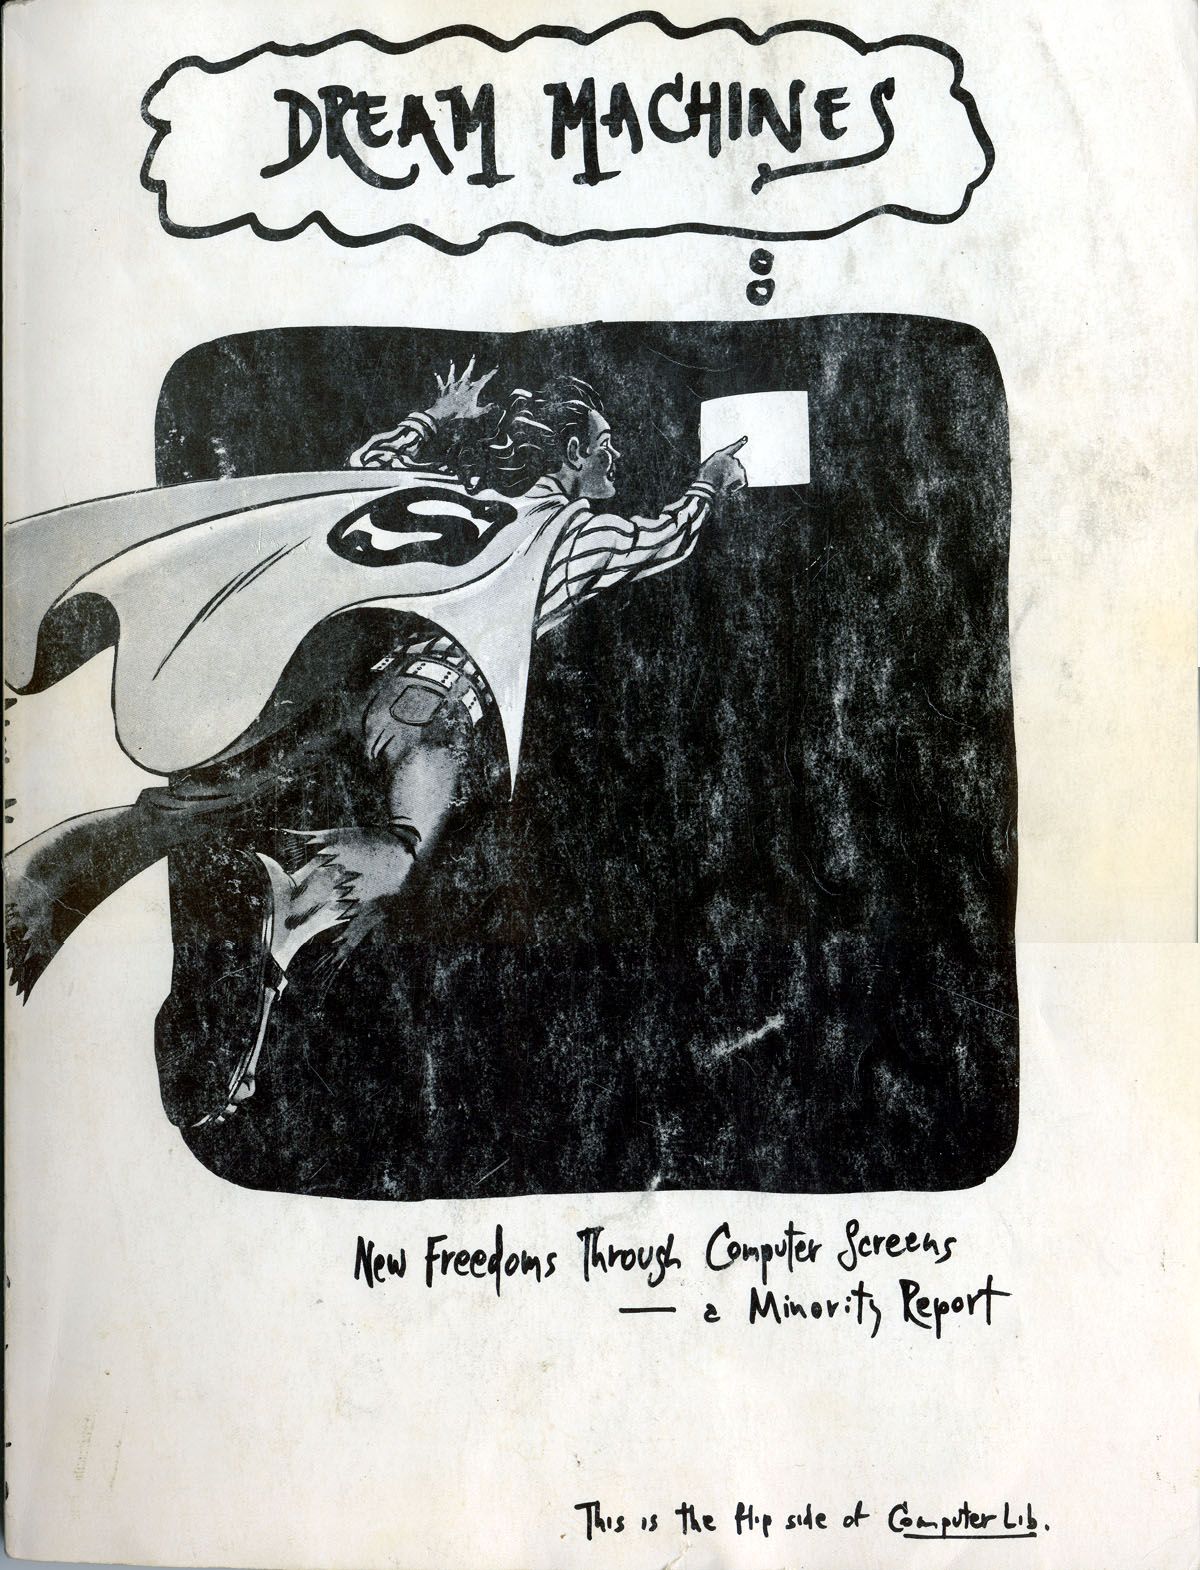 The cover of Dream Machines by Ted Nelson (1974). Further text reads, "New Freedoms Through Computer Screens – a Minority Report."